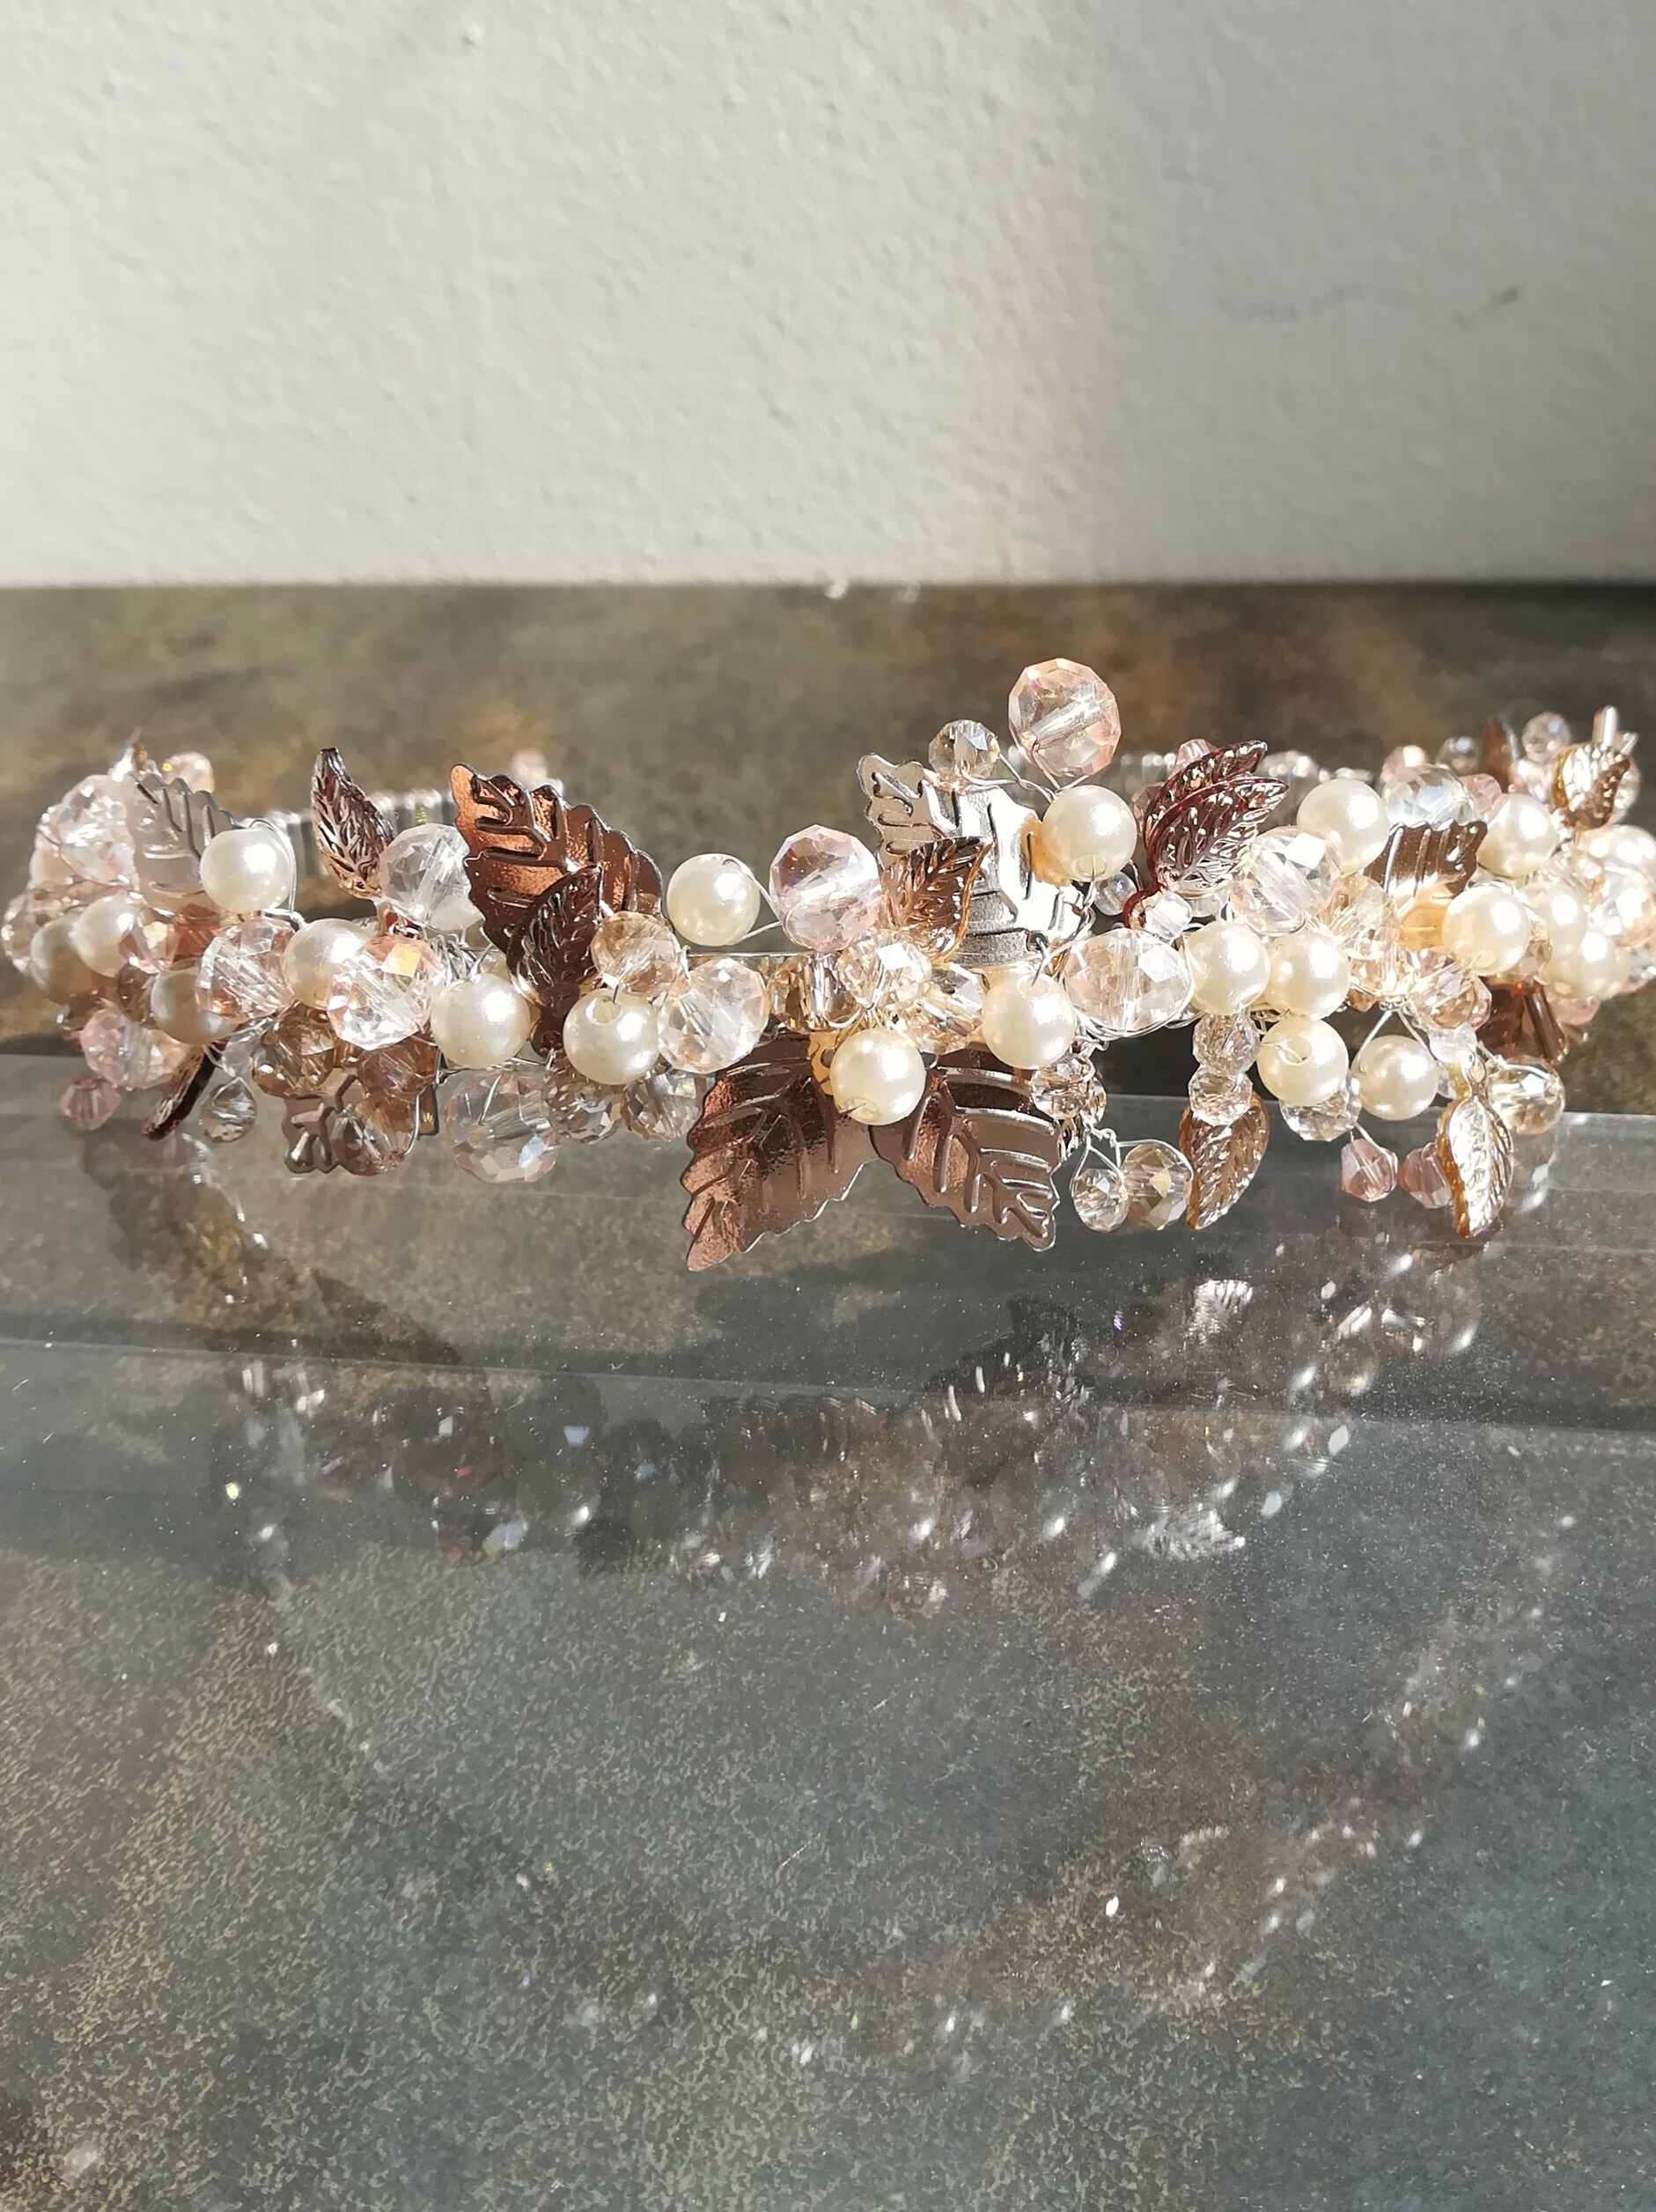  Stylish Rose Gold and Peach Tiara with Crystals and Leaves - Rose Gold Deluxe